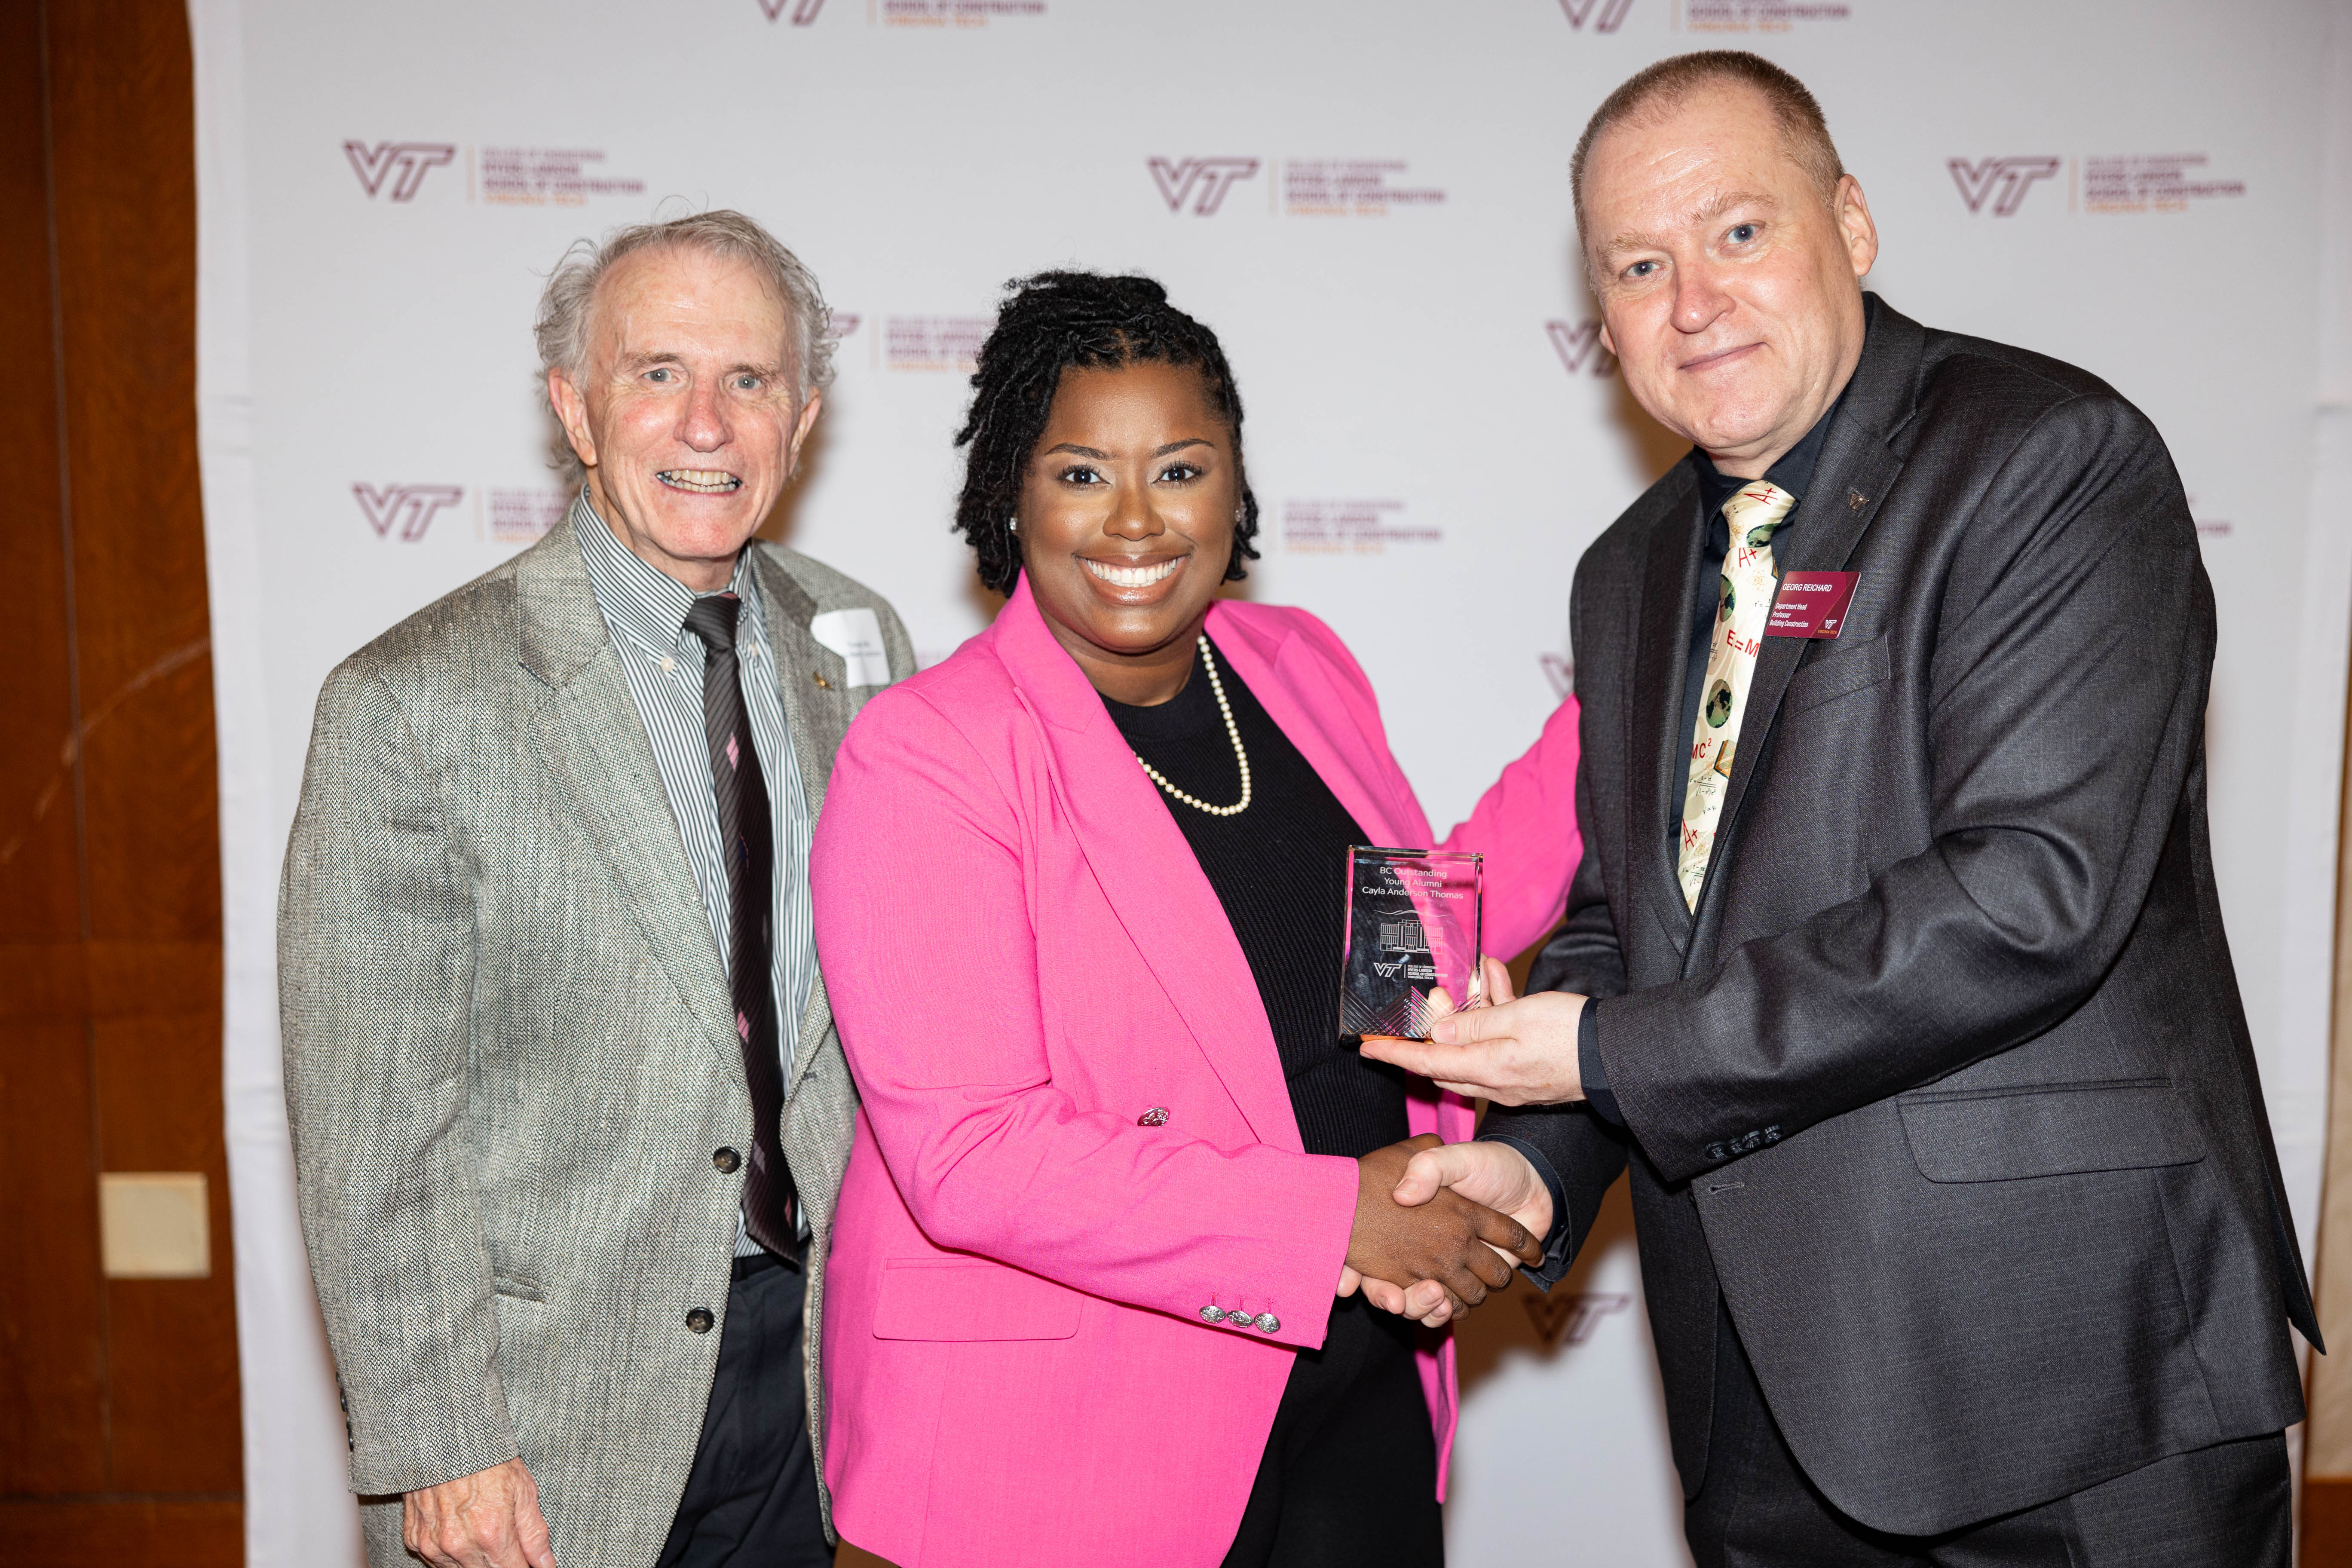 (From left) Thomas Mills, Cayla Thomas '16 and Georg Reichard. Photo by Will Drew for Virginia Tech.